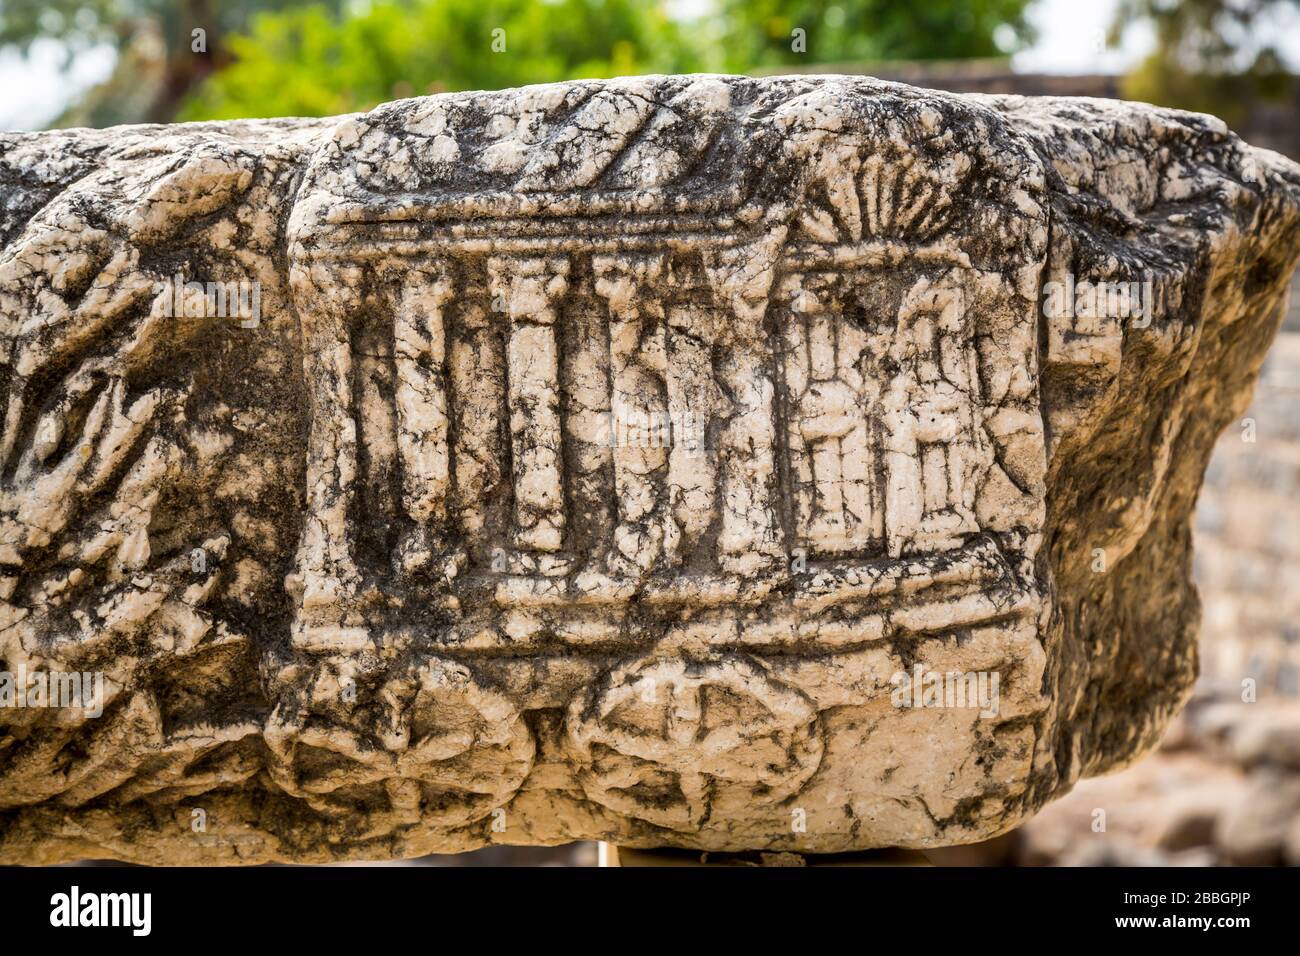 A stone relief carving of the Ark of the Covenant at the Biblical site of Capernaum, Galilee, Israel, Middle East. Stock Photo